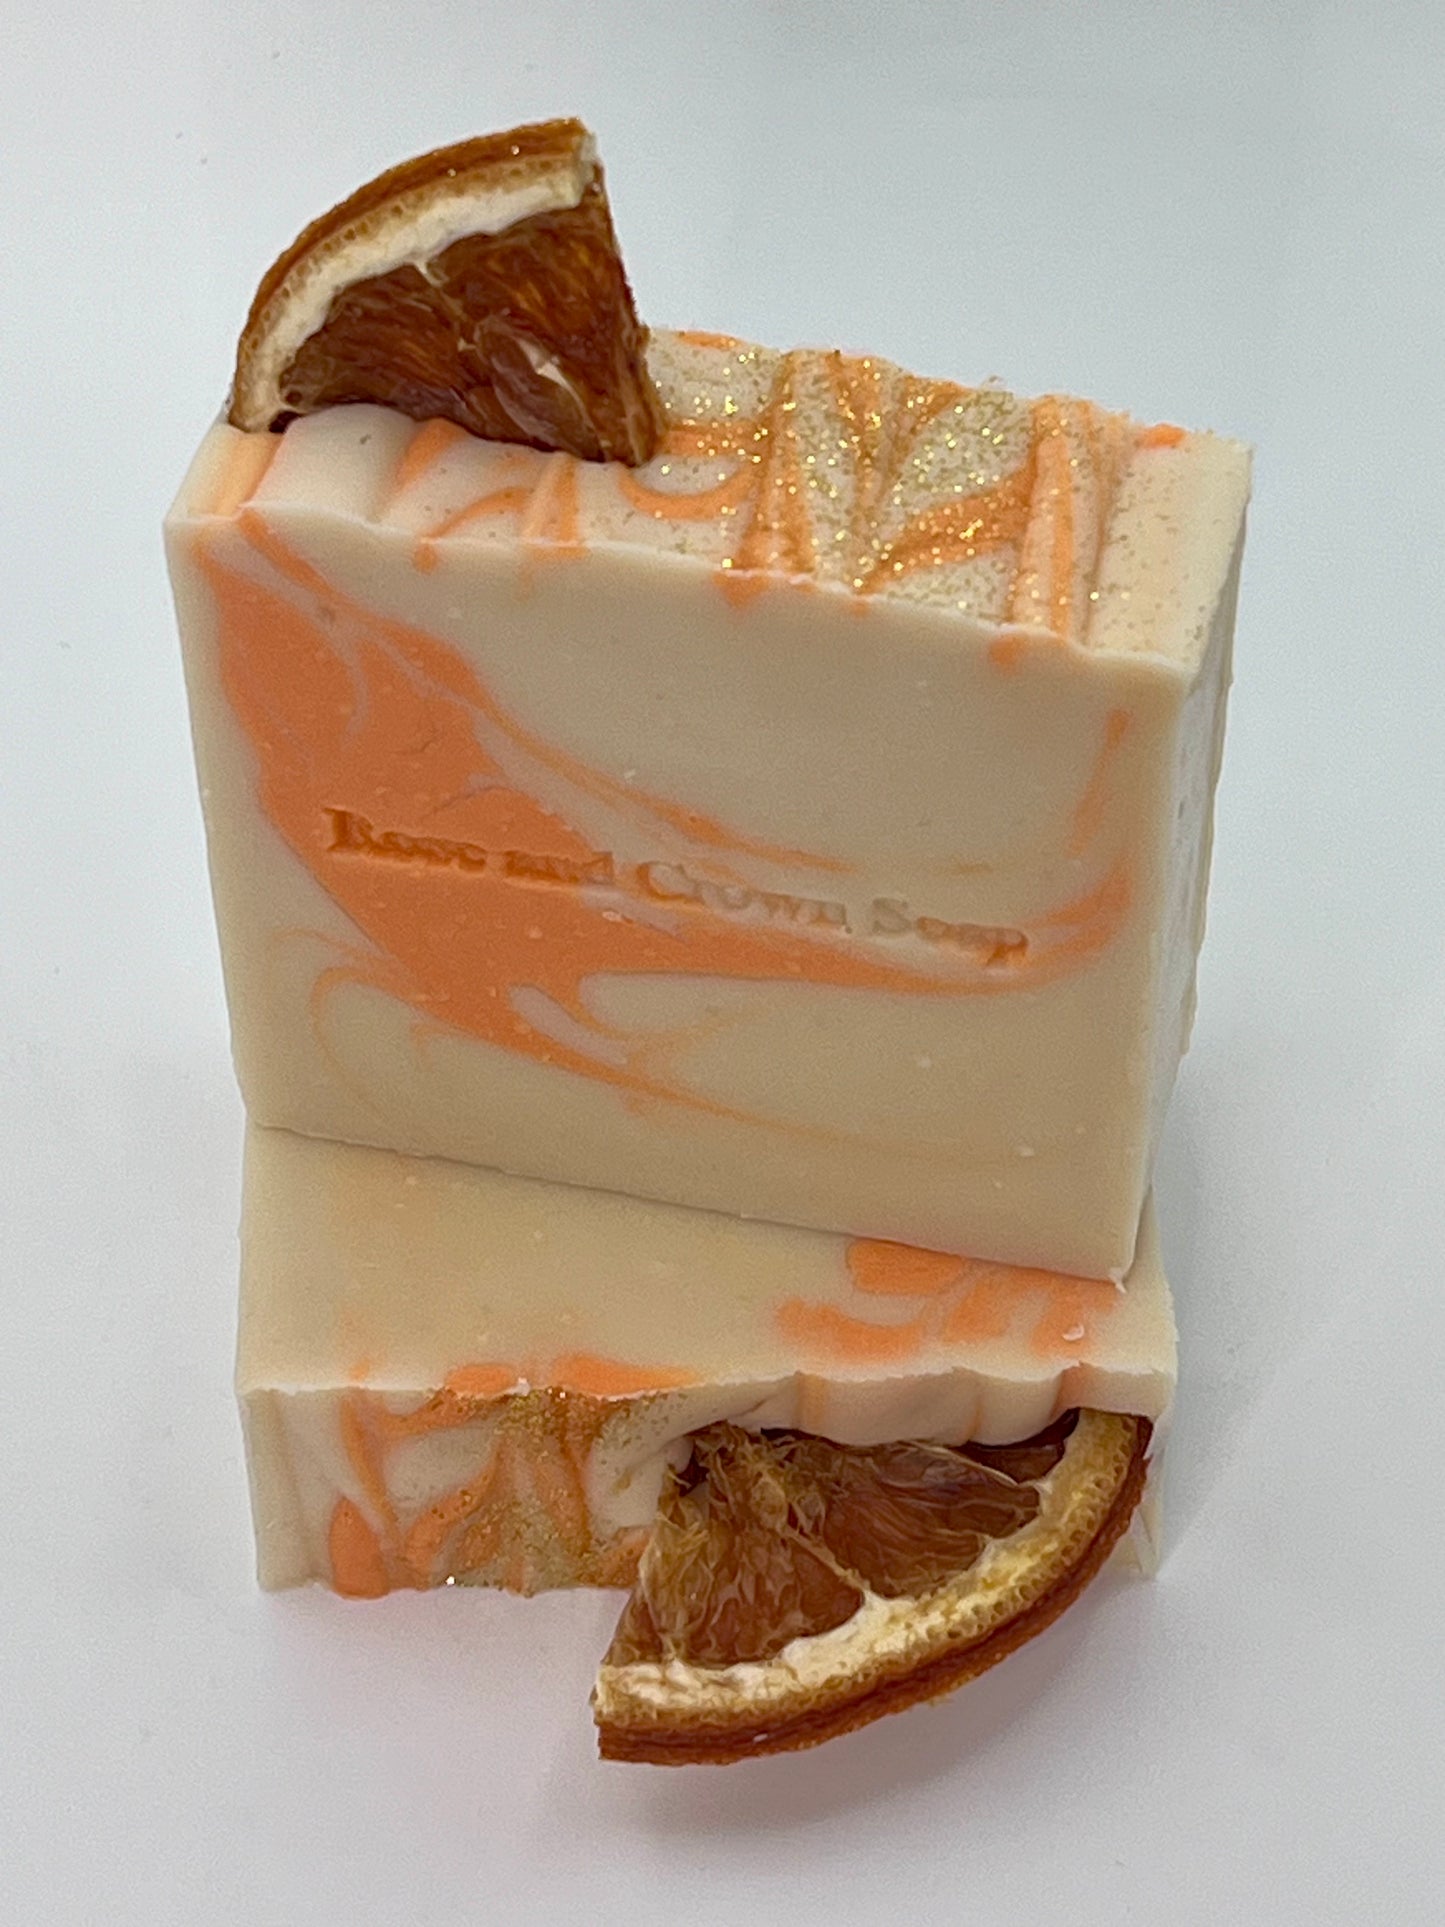 The Clementine Bar